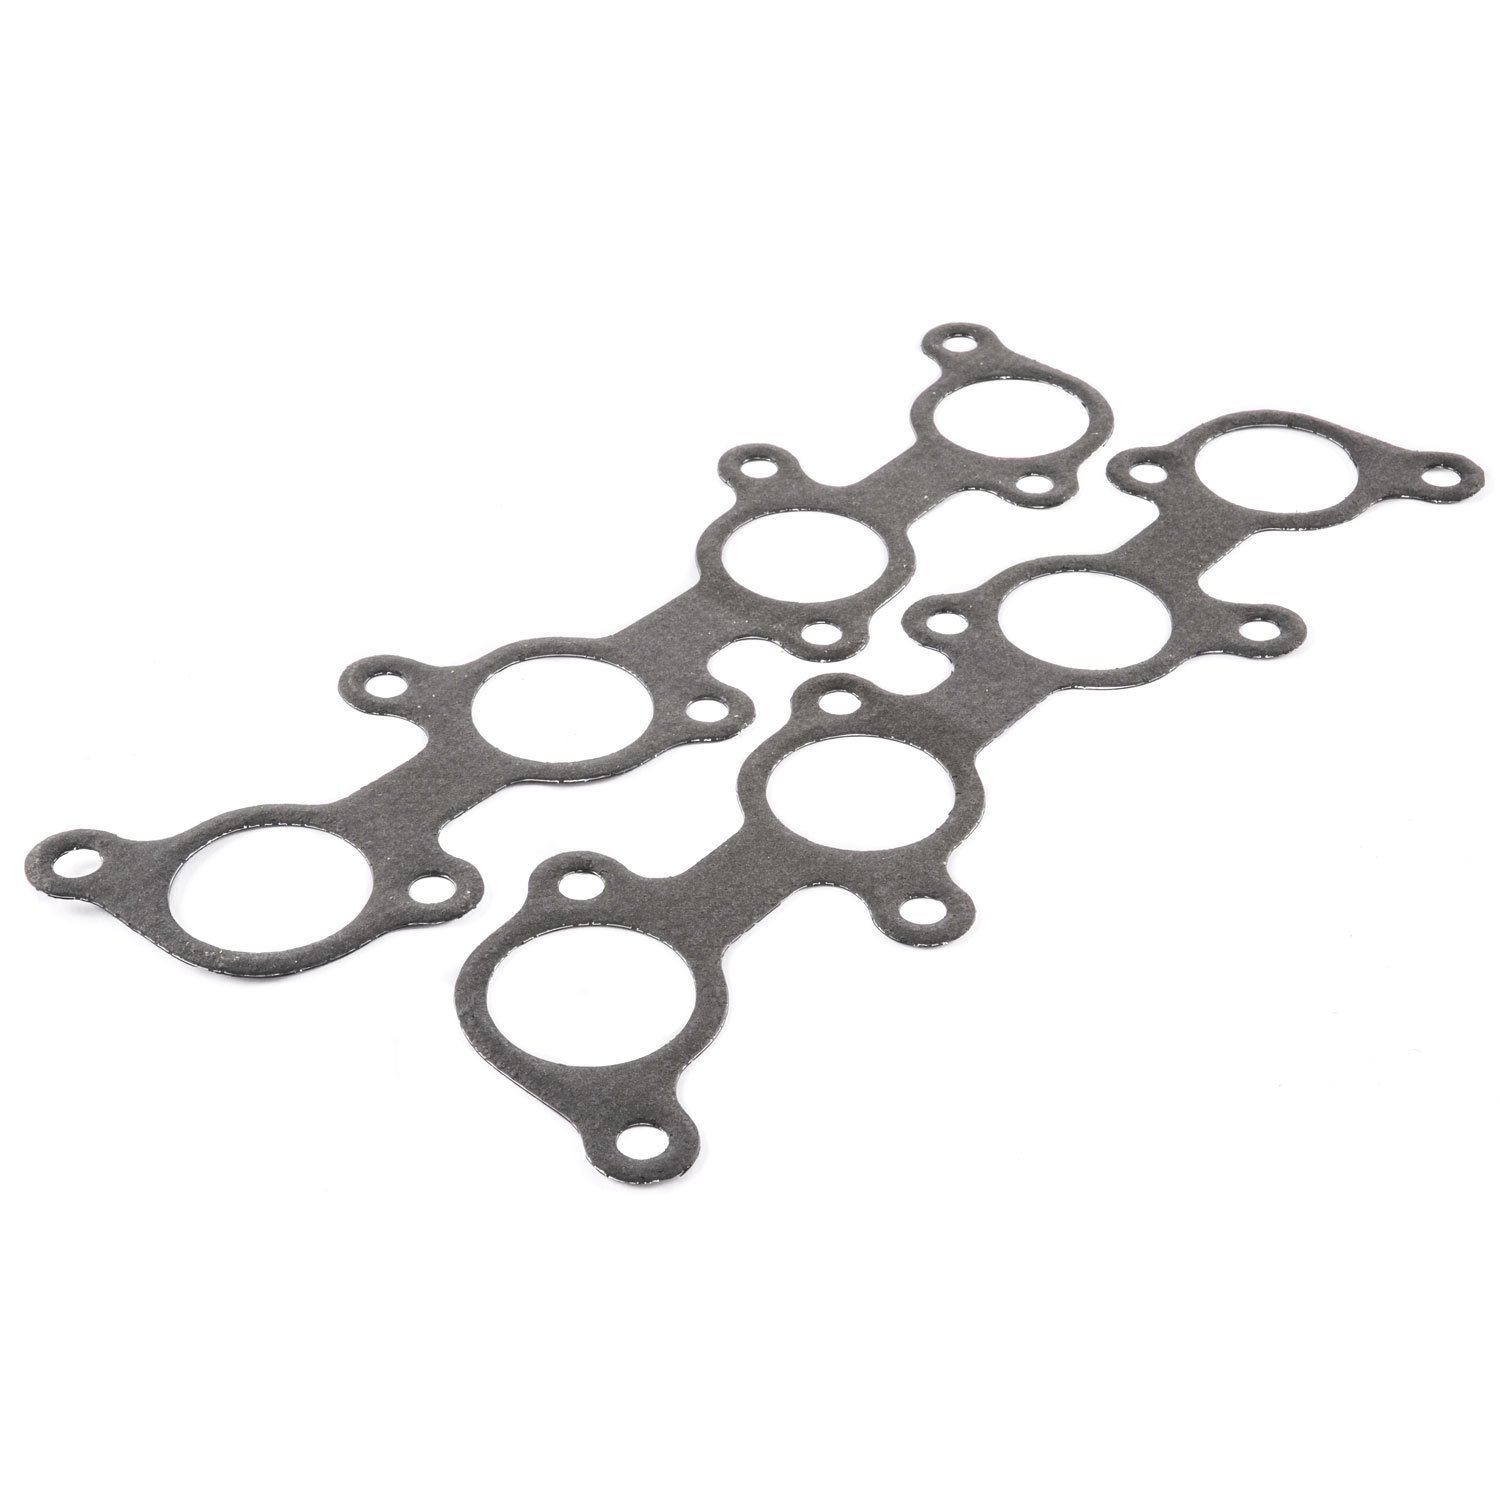 Exhaust Header Gaskets for 2011 & Up Ford Coyote 5.0L